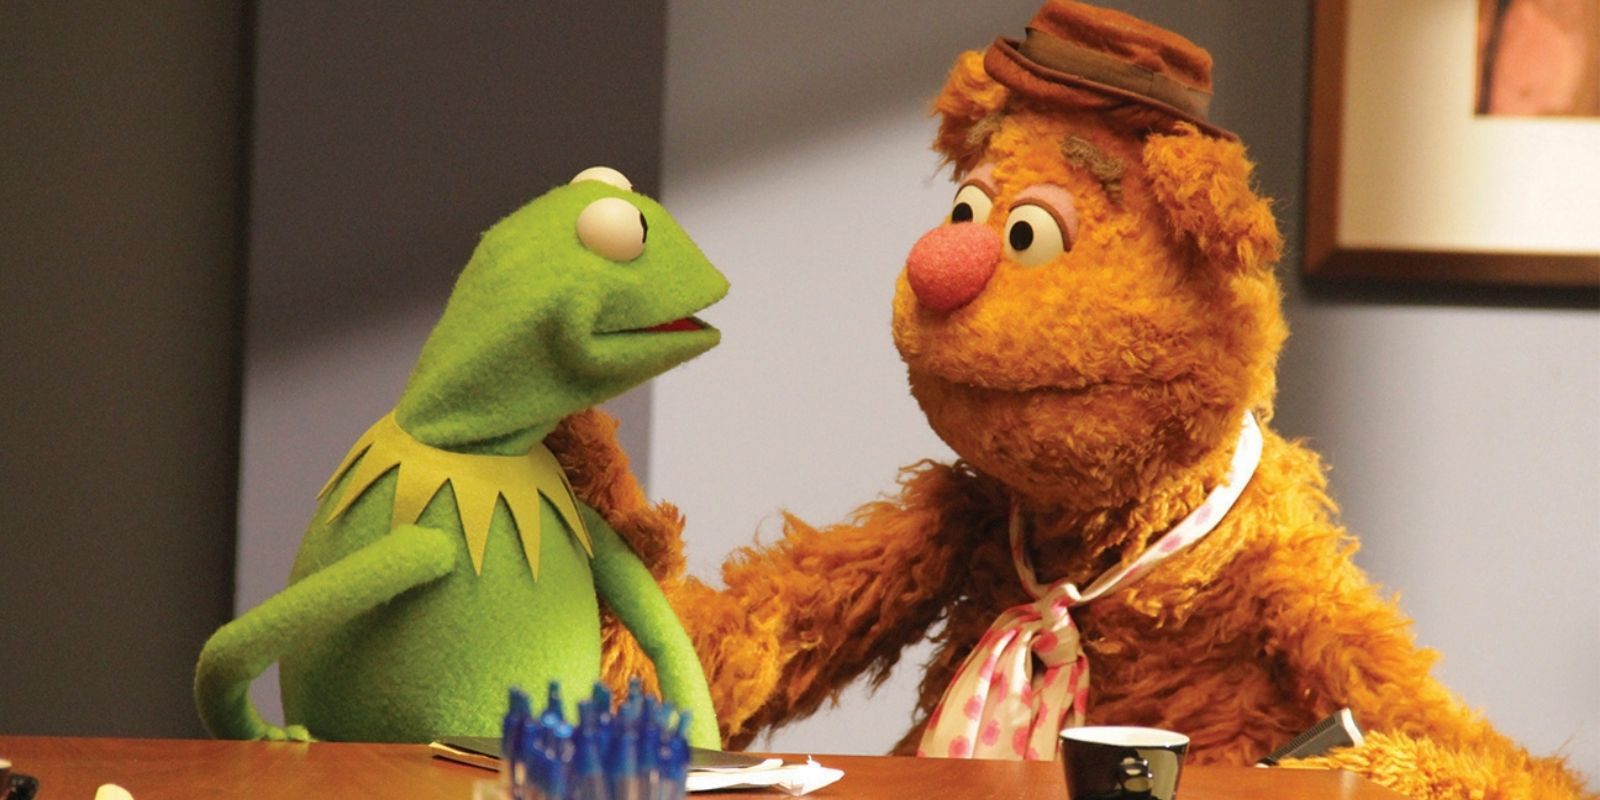 Kermit the Frog and Fozzie Bear sit together in The Muppets